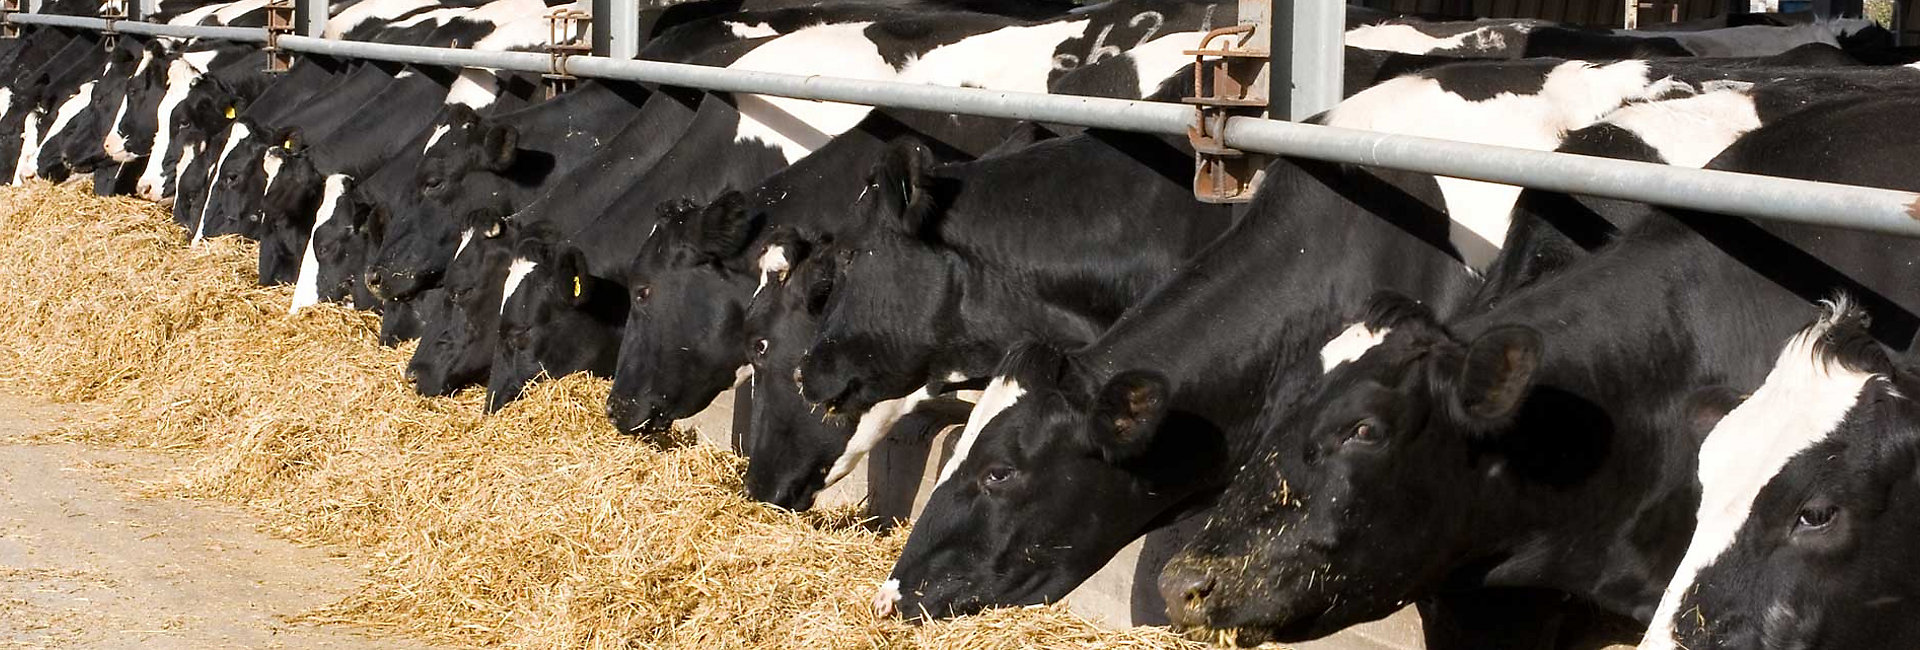 Animal Nutrition & Health Products for Dairy Cattle | Kemin Animal Nutrition  & Health - Canada